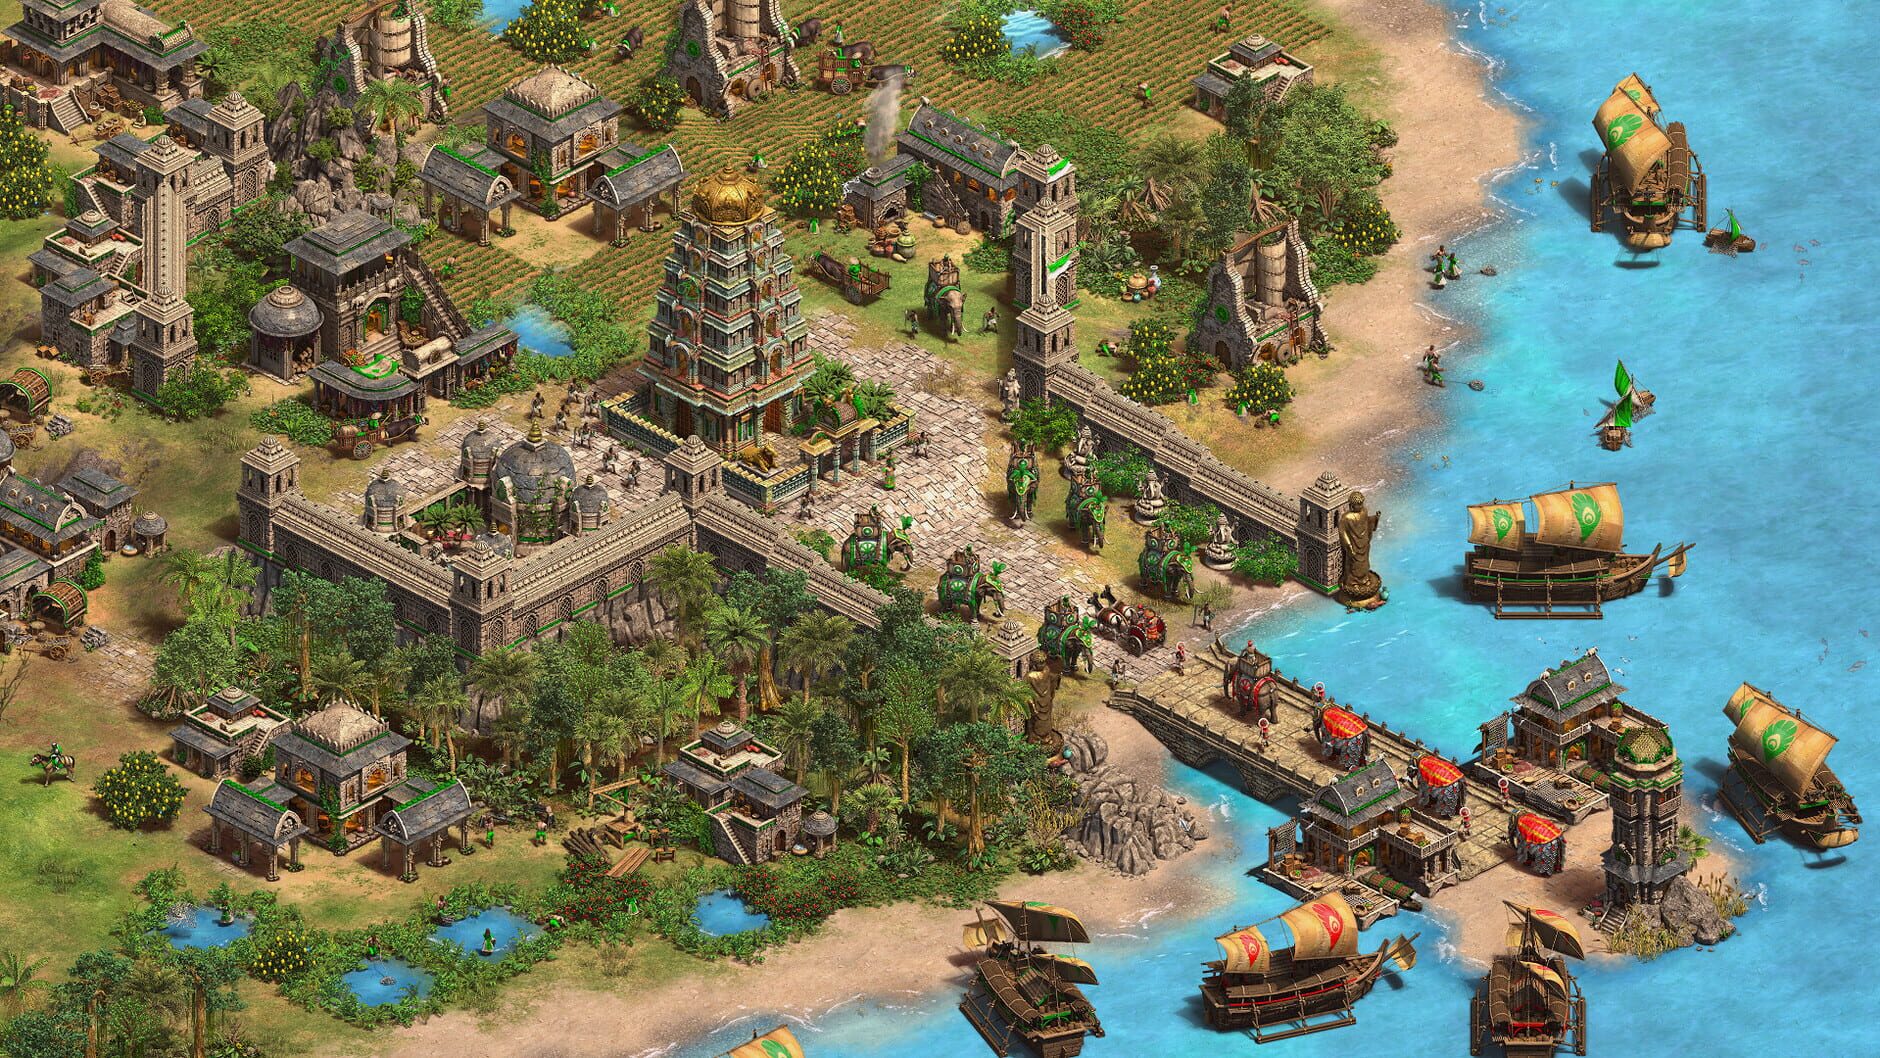 Screenshot for Age of Empires II: Definitive Edition - Dynasties of India